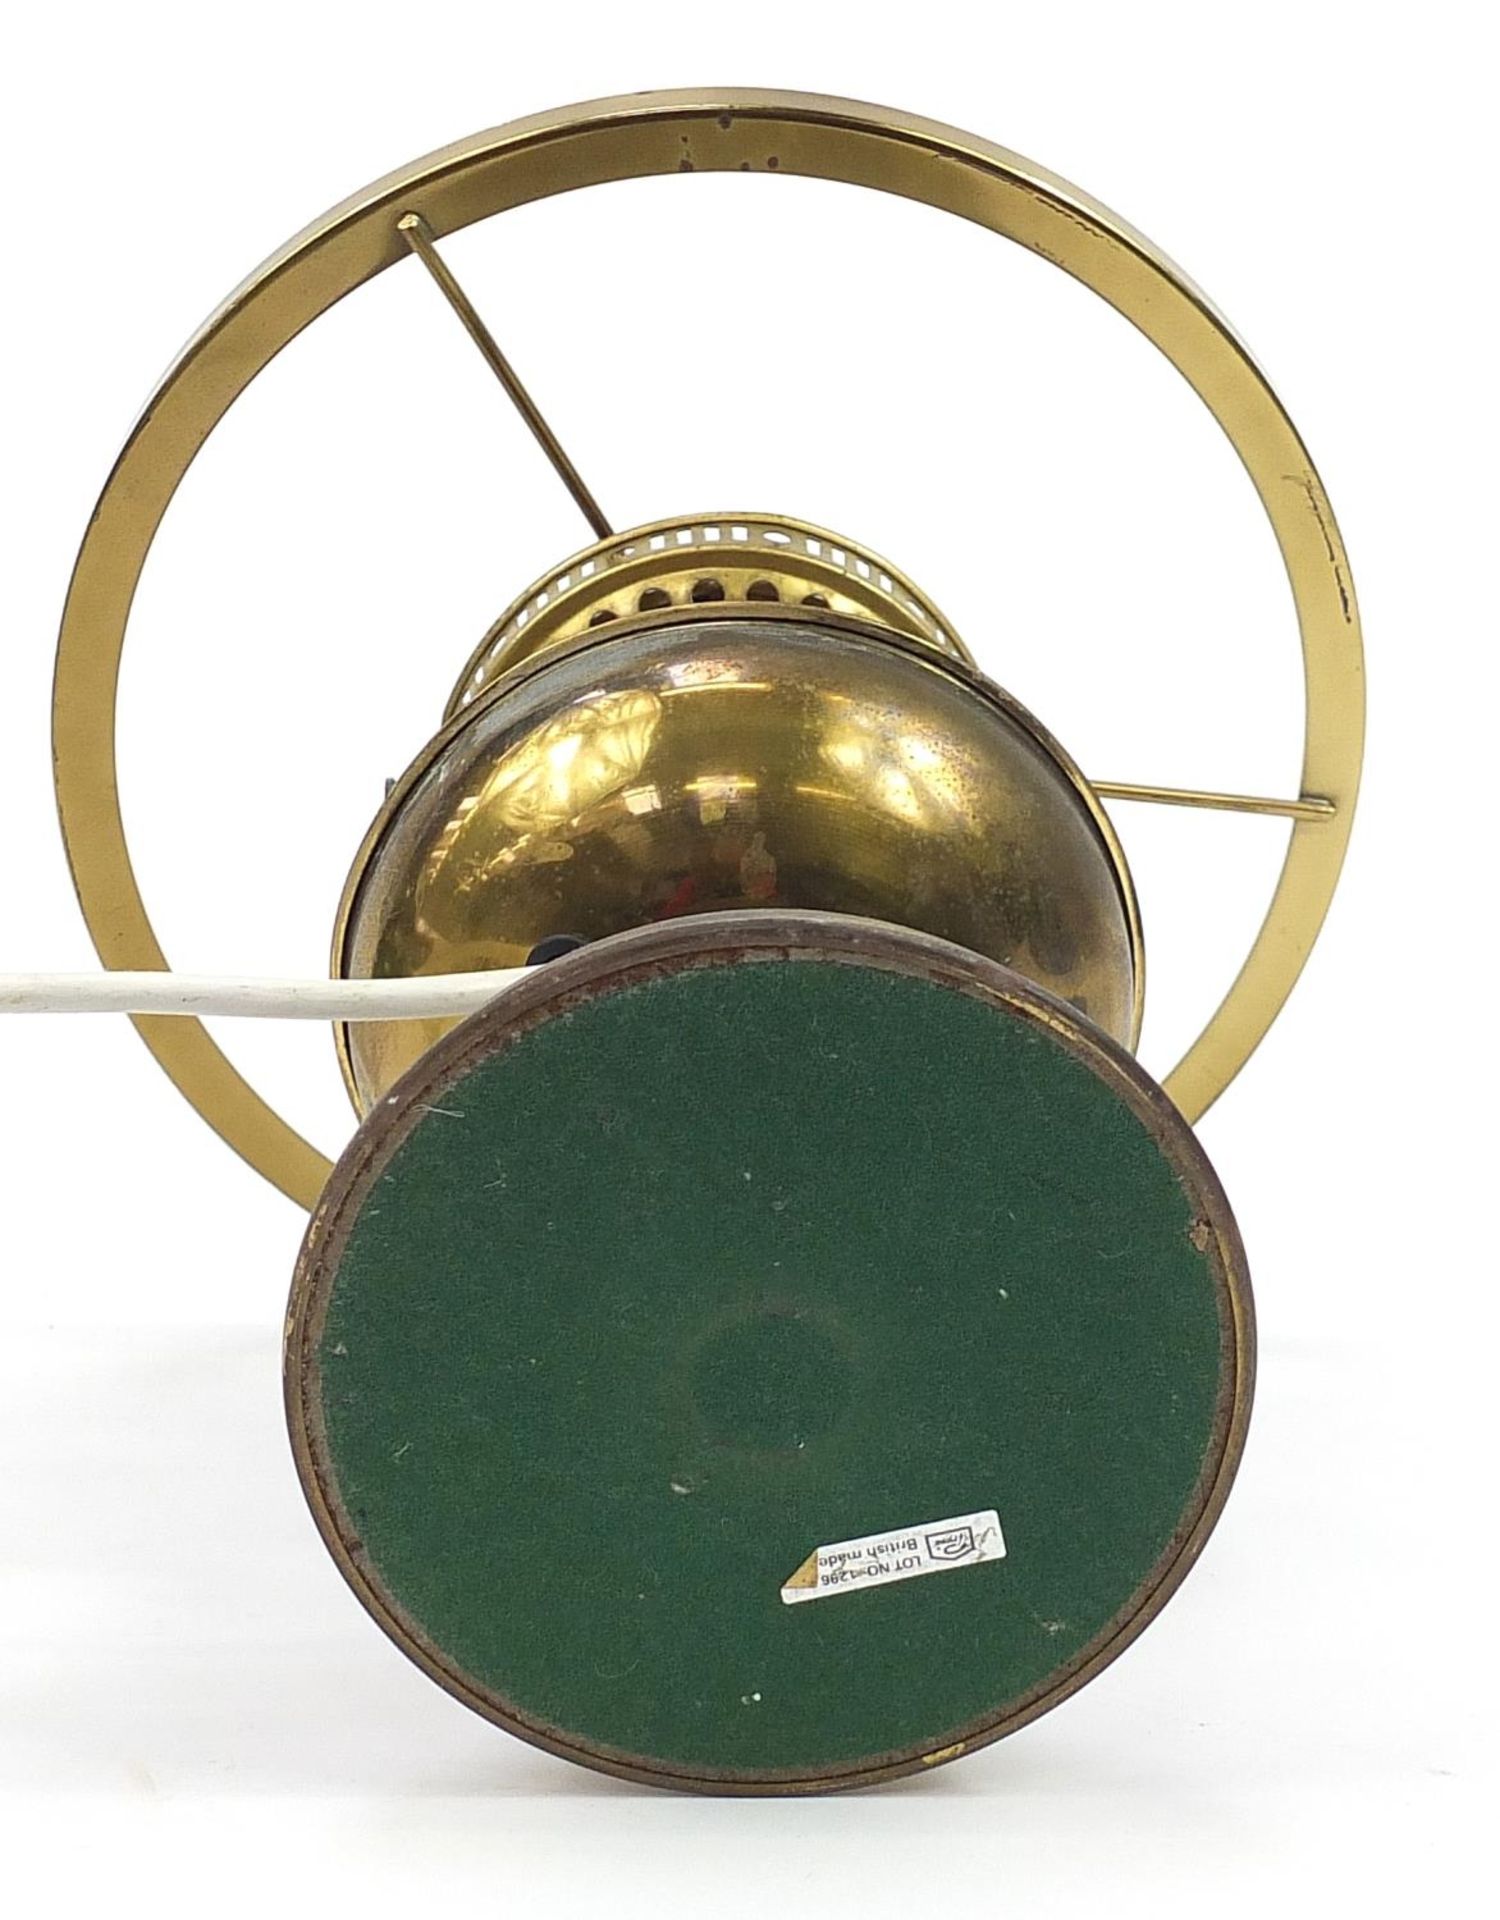 Victorian brass oil lamp with green glass shade converted to electric, 45cm high - Image 4 of 4